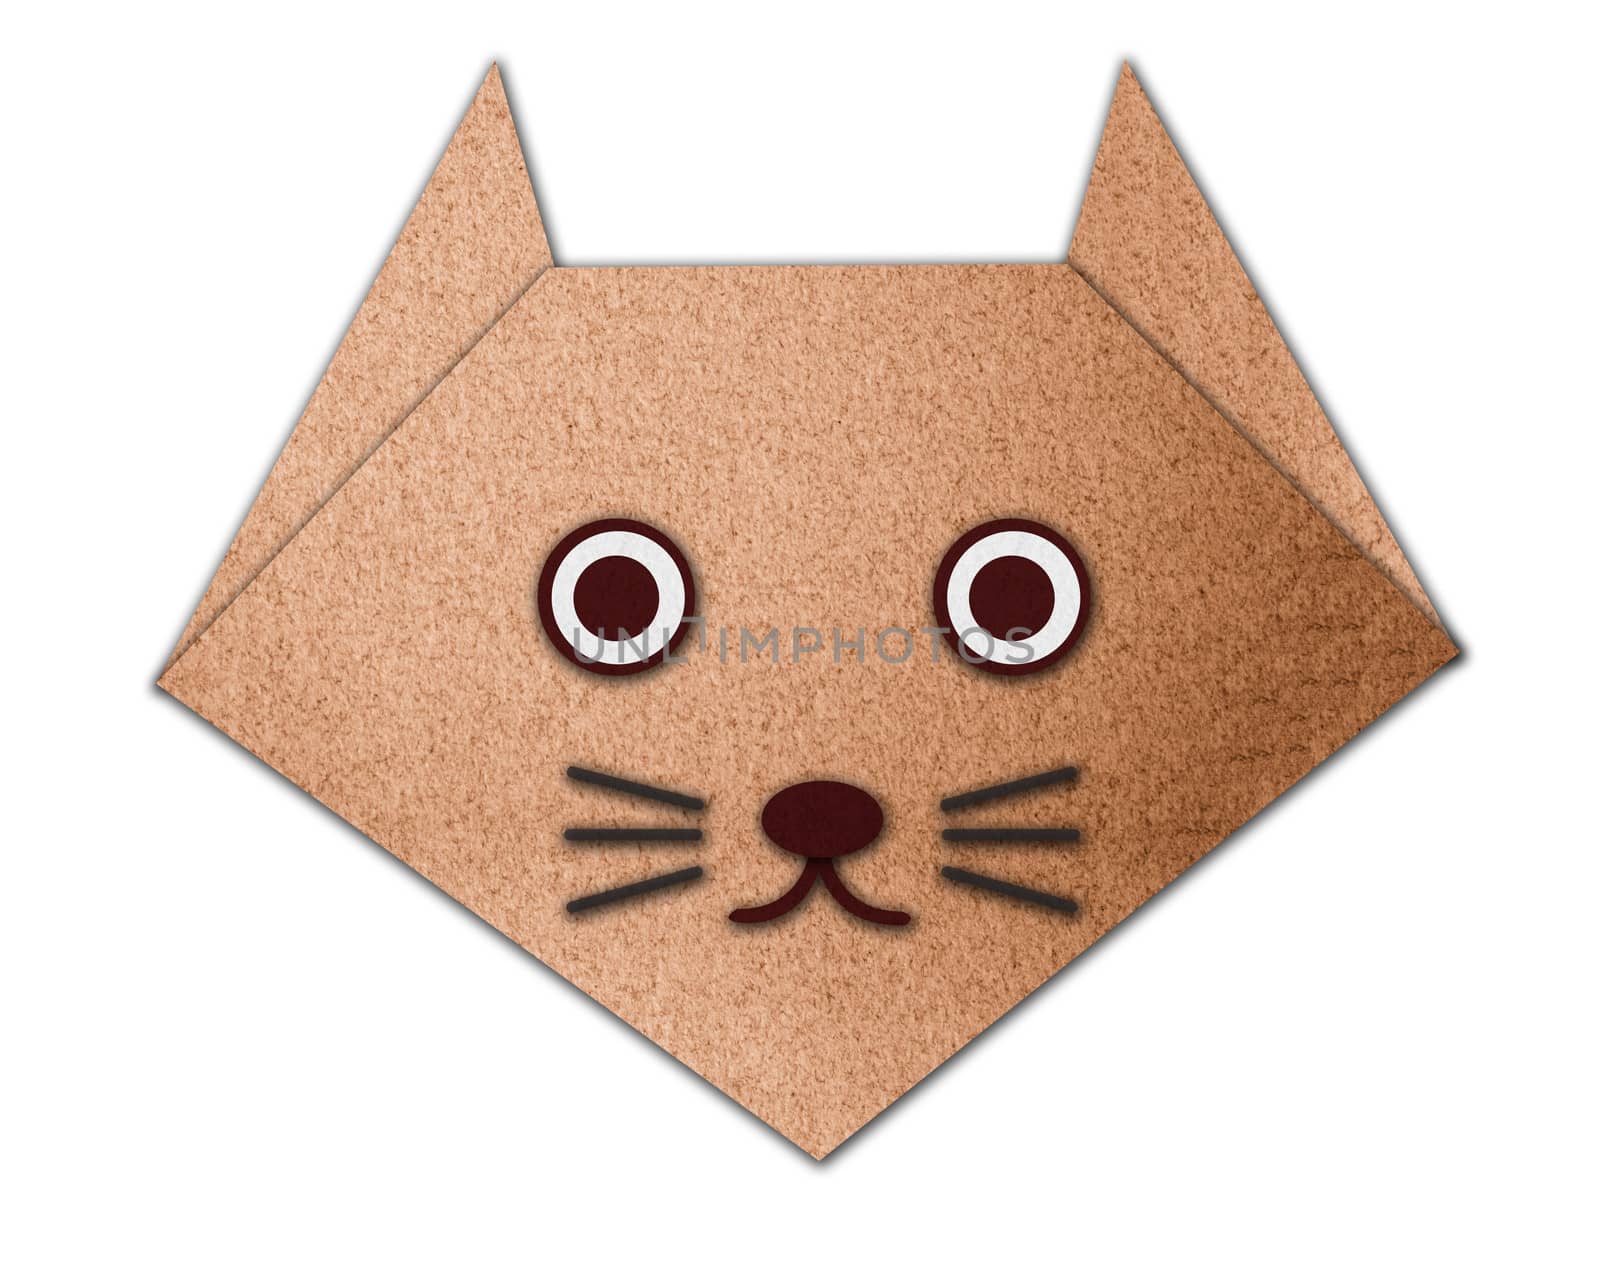 Origami cat made from paper made from paper by Sorapop